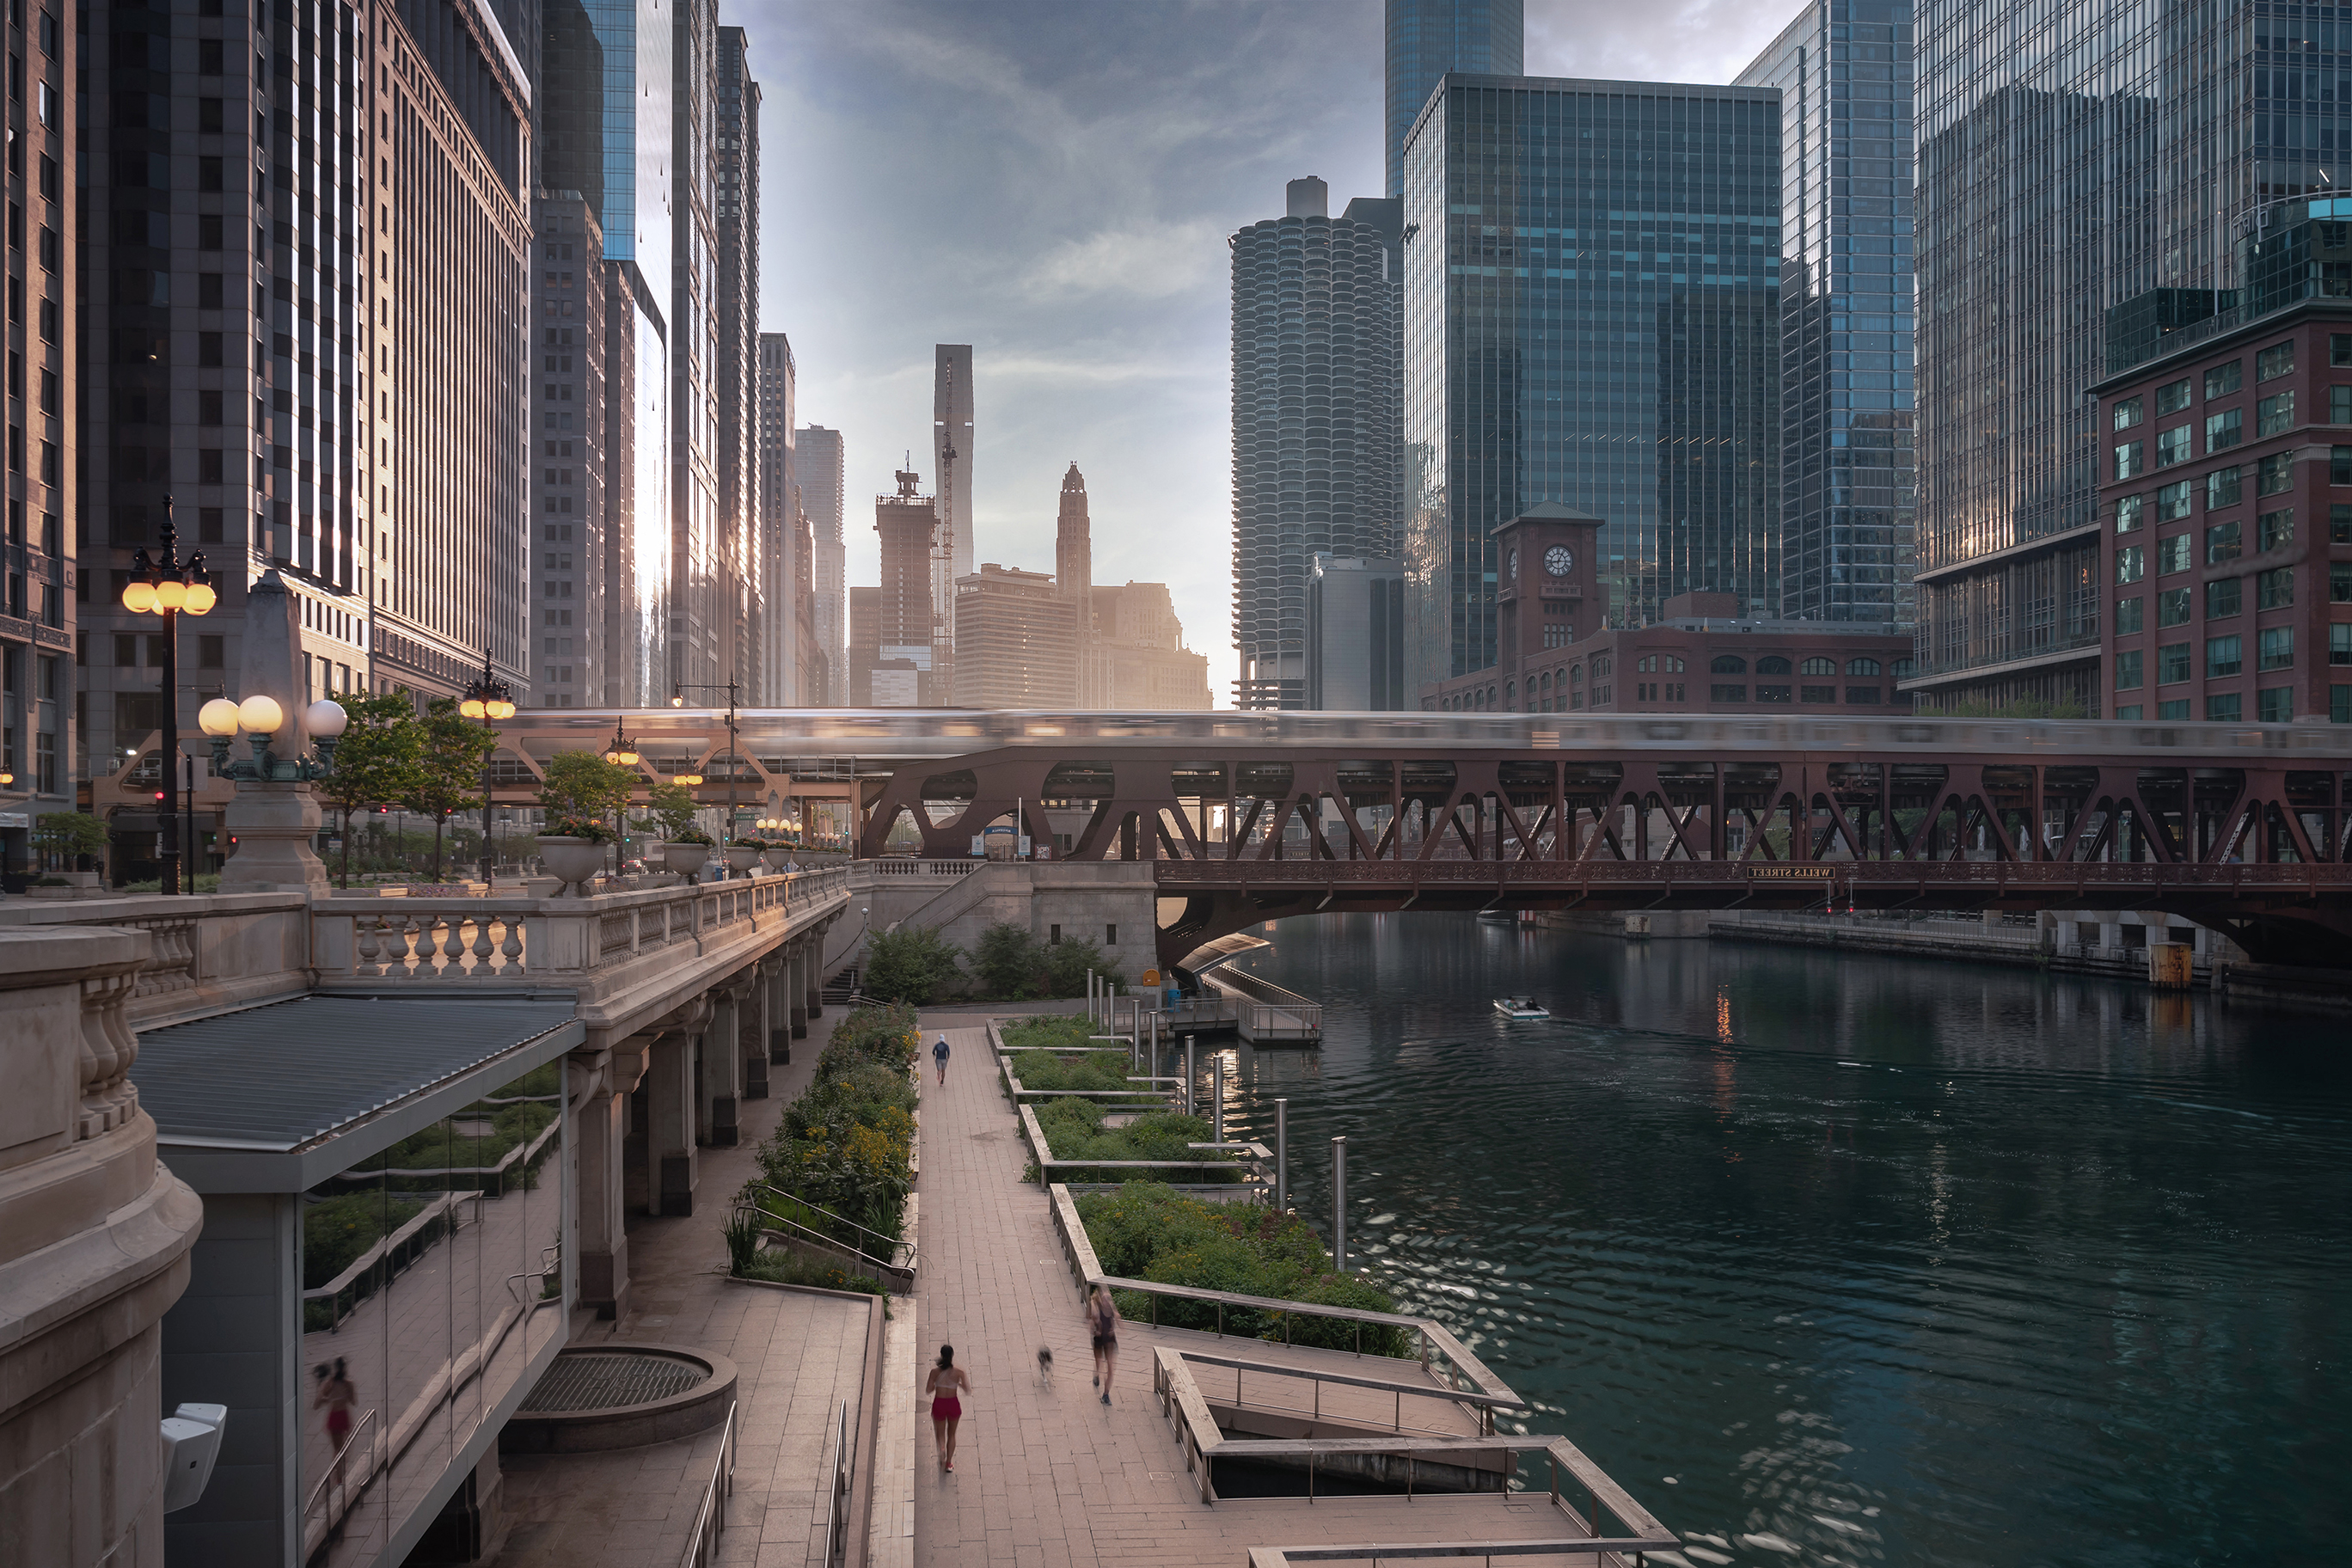 City river walkway with skyscrapers in the background